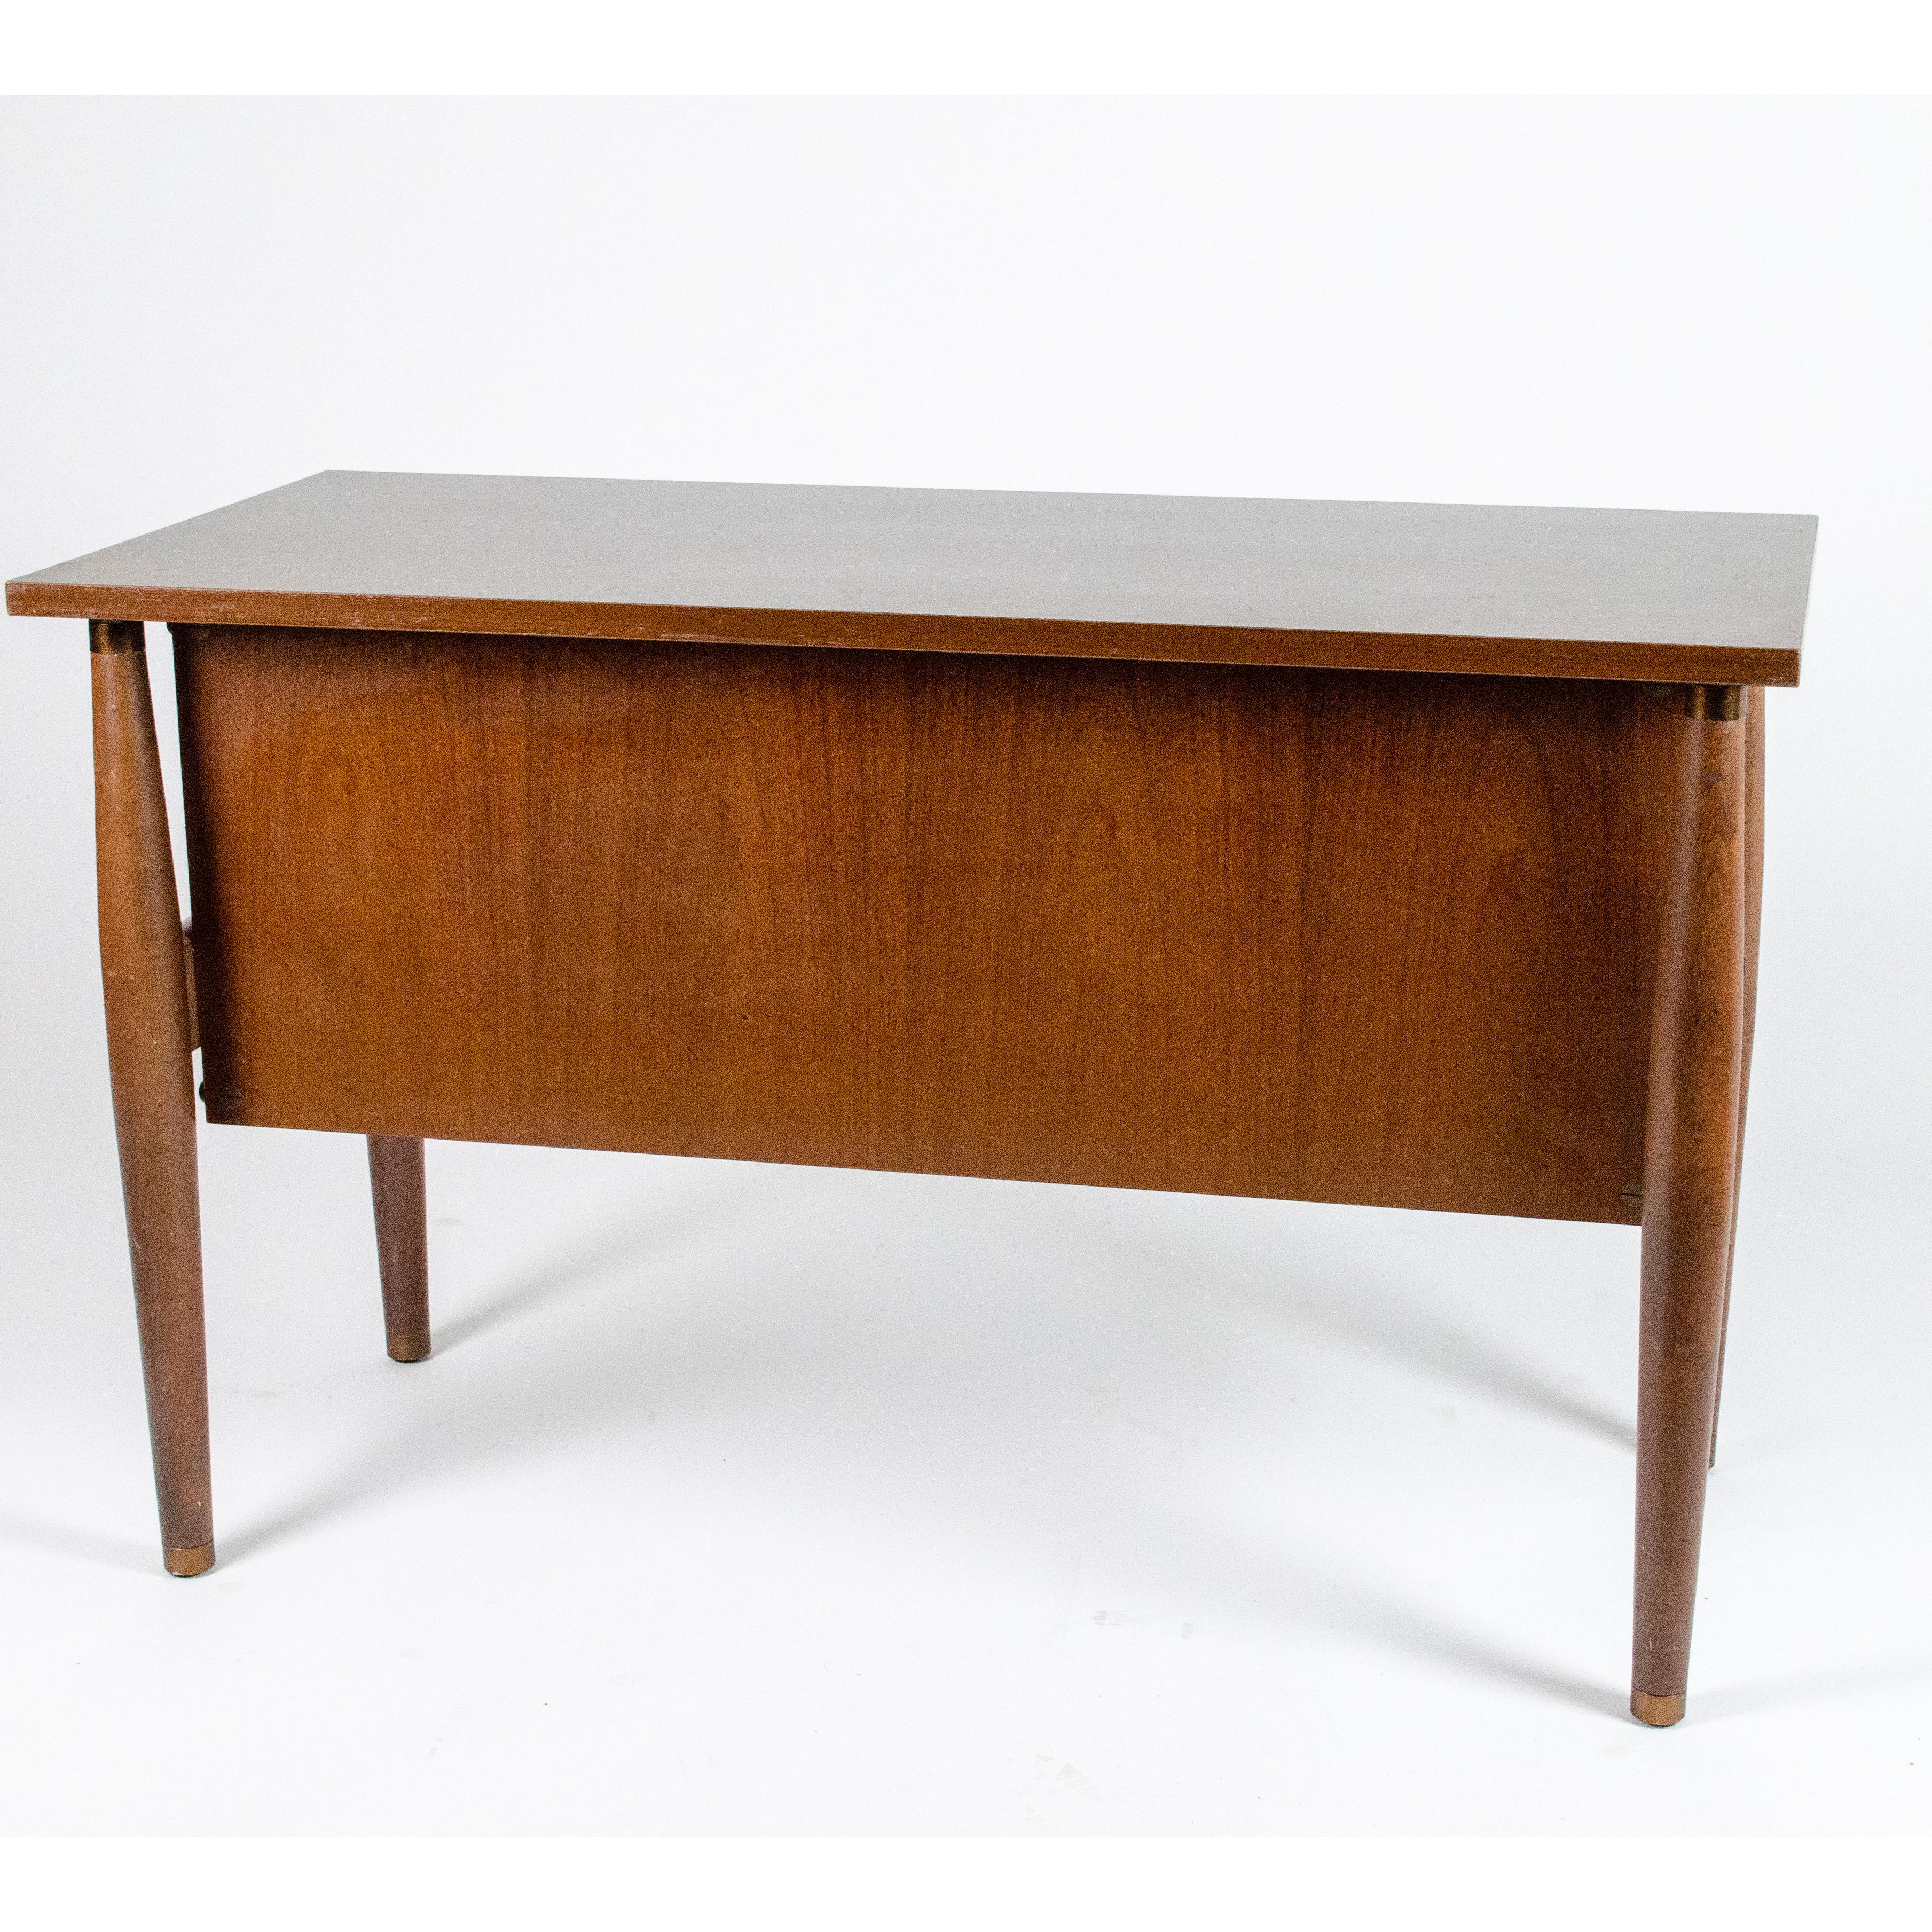 Italian 1960s wood and brown wood effect laminated top small desk with drawers. On each drawer is present the signature marked Schirolli Mantova. Legs are in wood. Good conditions, coherent with age and prior use, no structural damage only few small